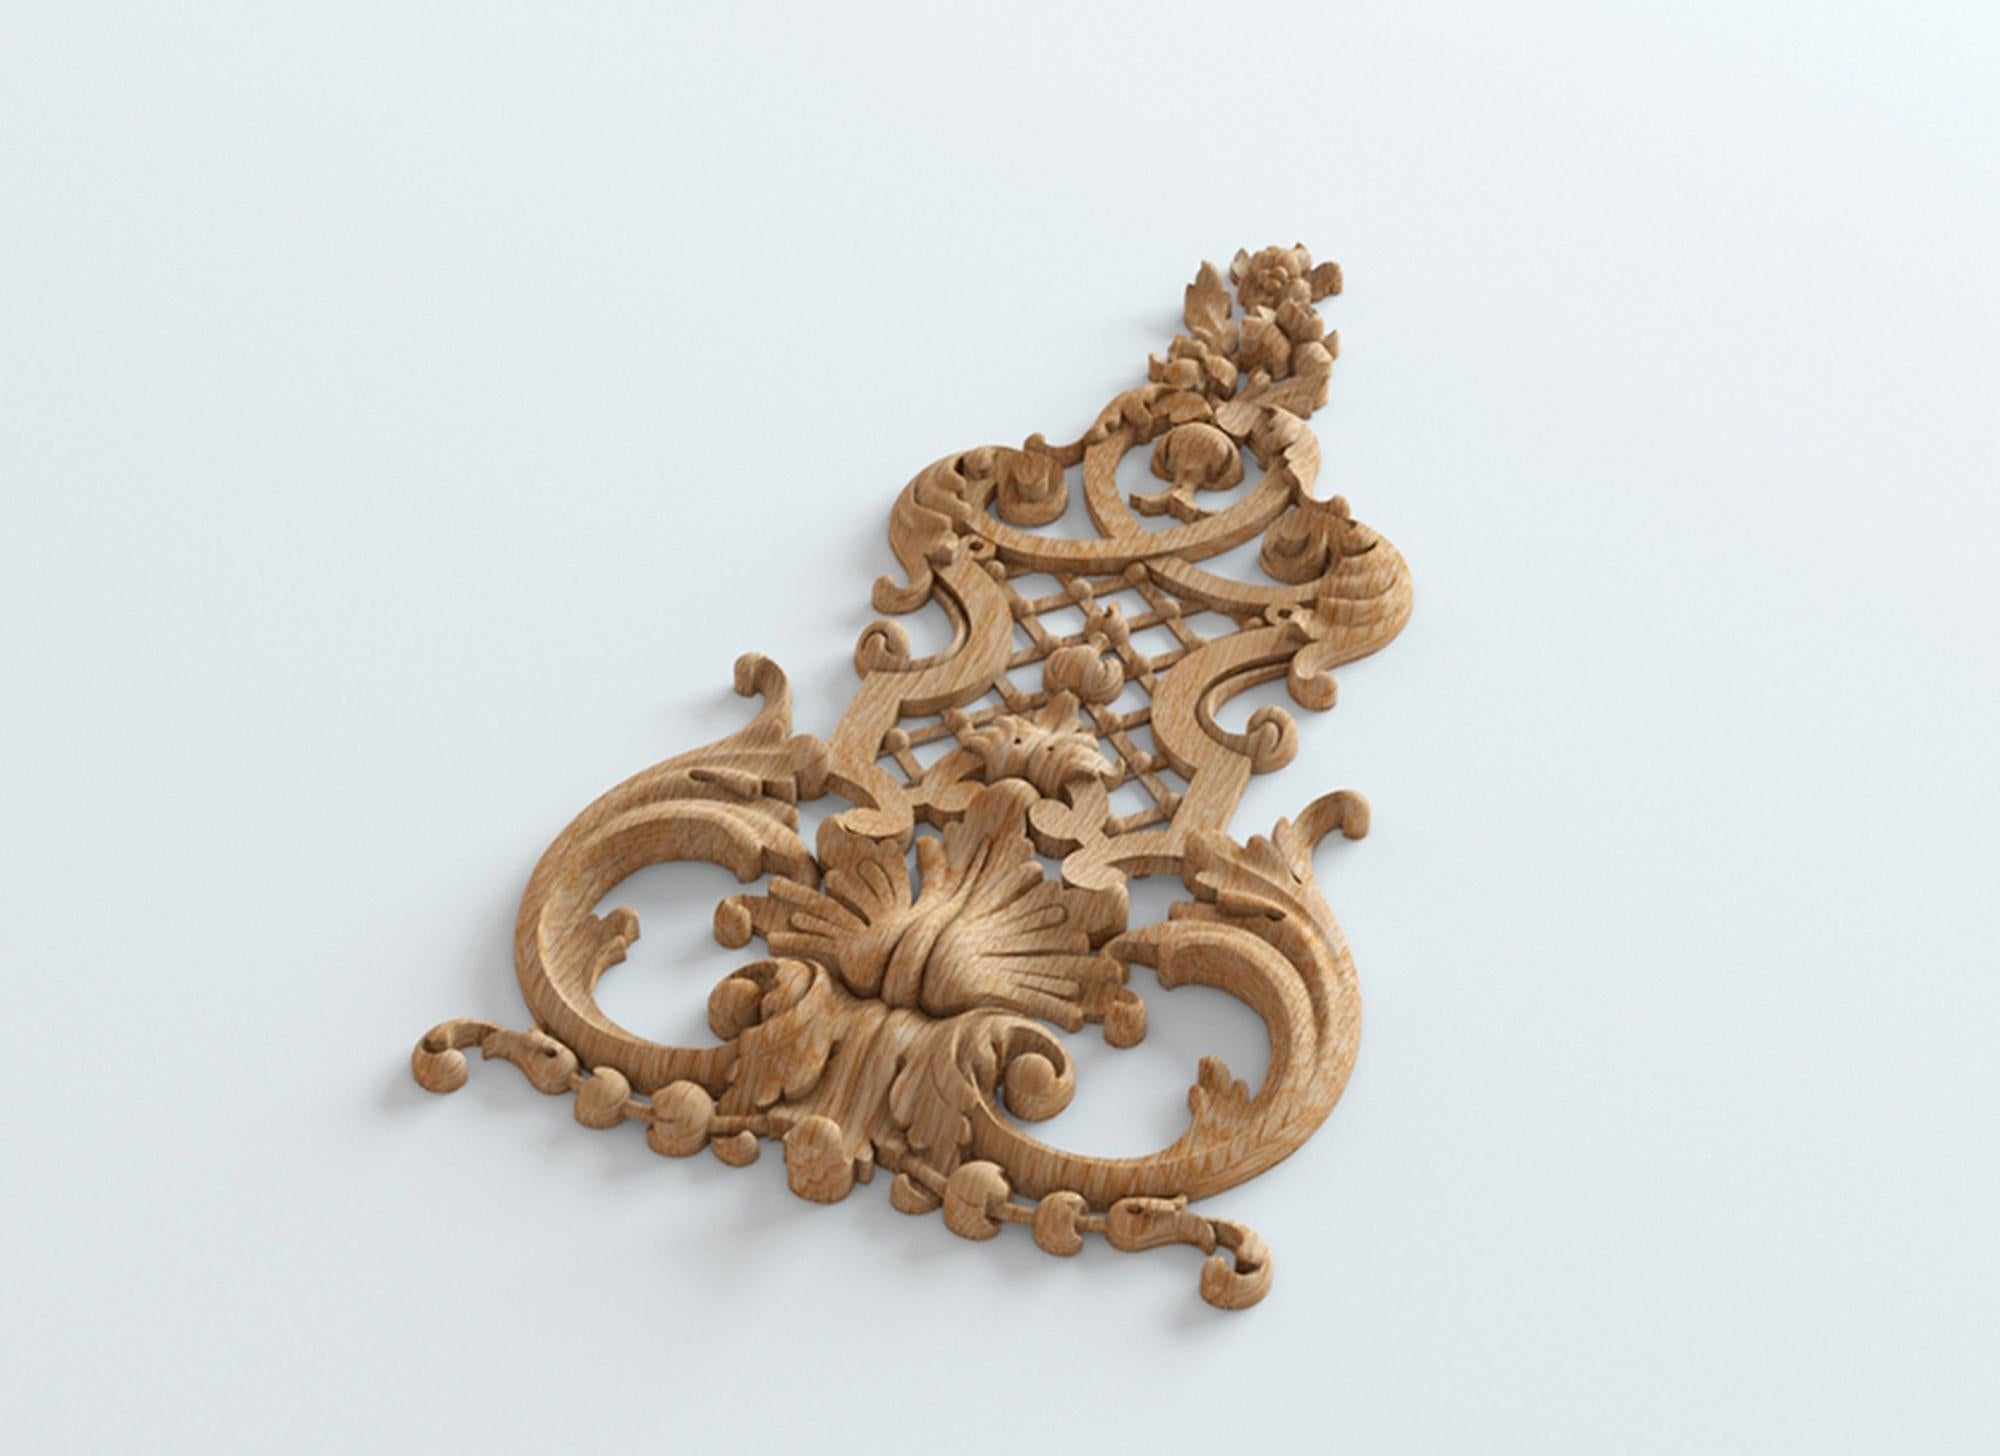 High quality decorative carved wood onlay. Material: oak or beech of your choice. Unpainted.

>> SKU: N-414

>> Dimensions (A x B x C):

1) 12.09